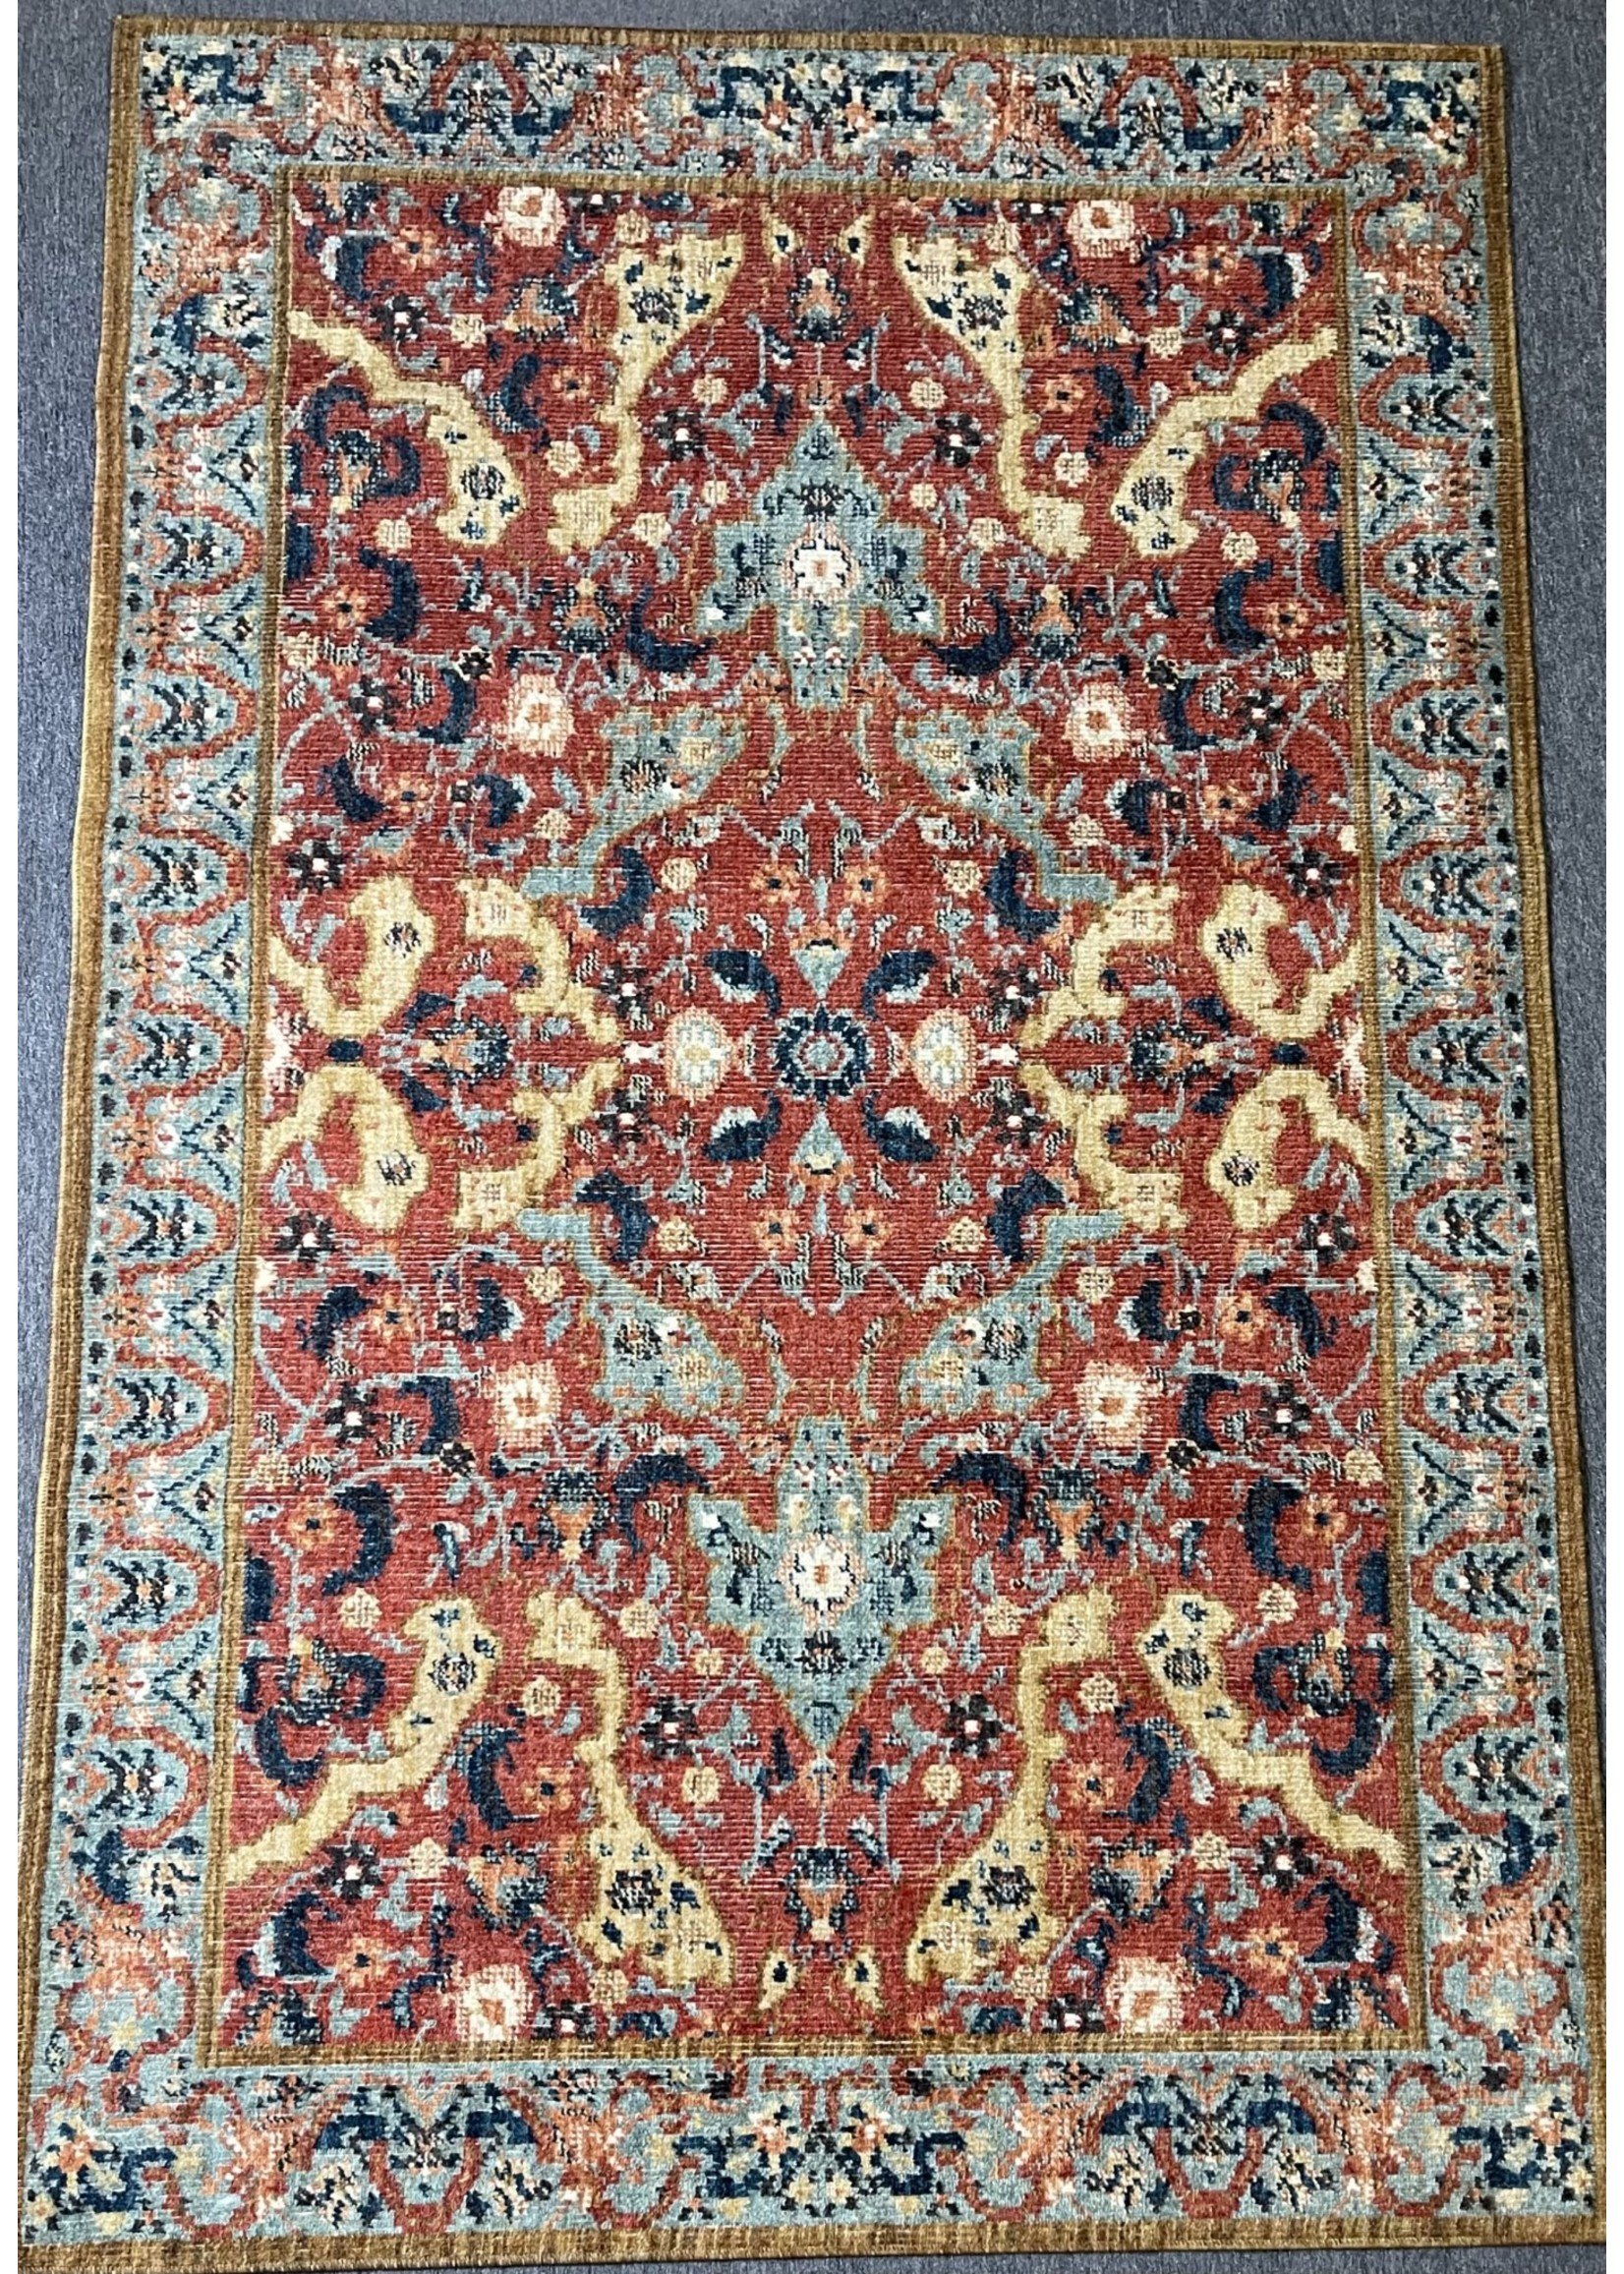 MAYBERRY CARPET HEIRLOOM 5X8 AREA RUG